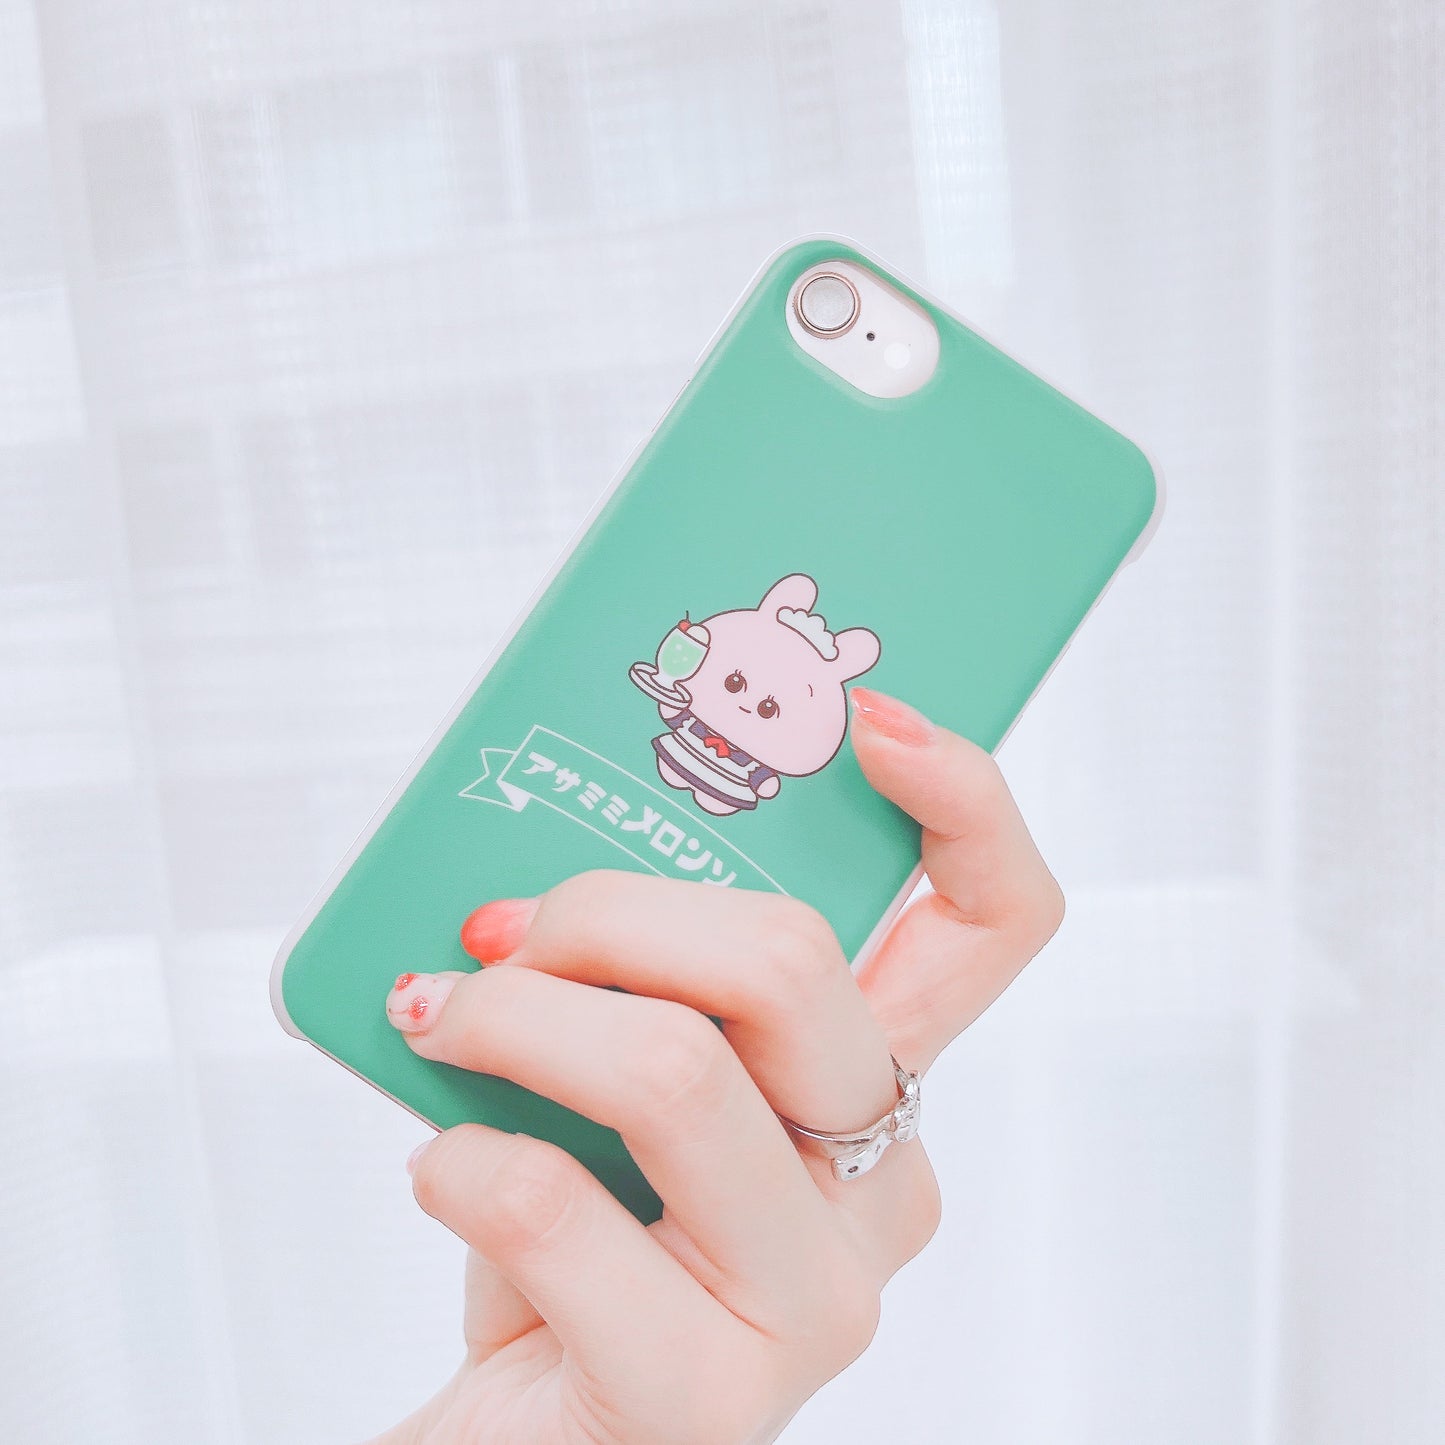 [Asamimi-chan] Smartphone case compatible with almost all models (melon soda) Docomo② [Made to order]